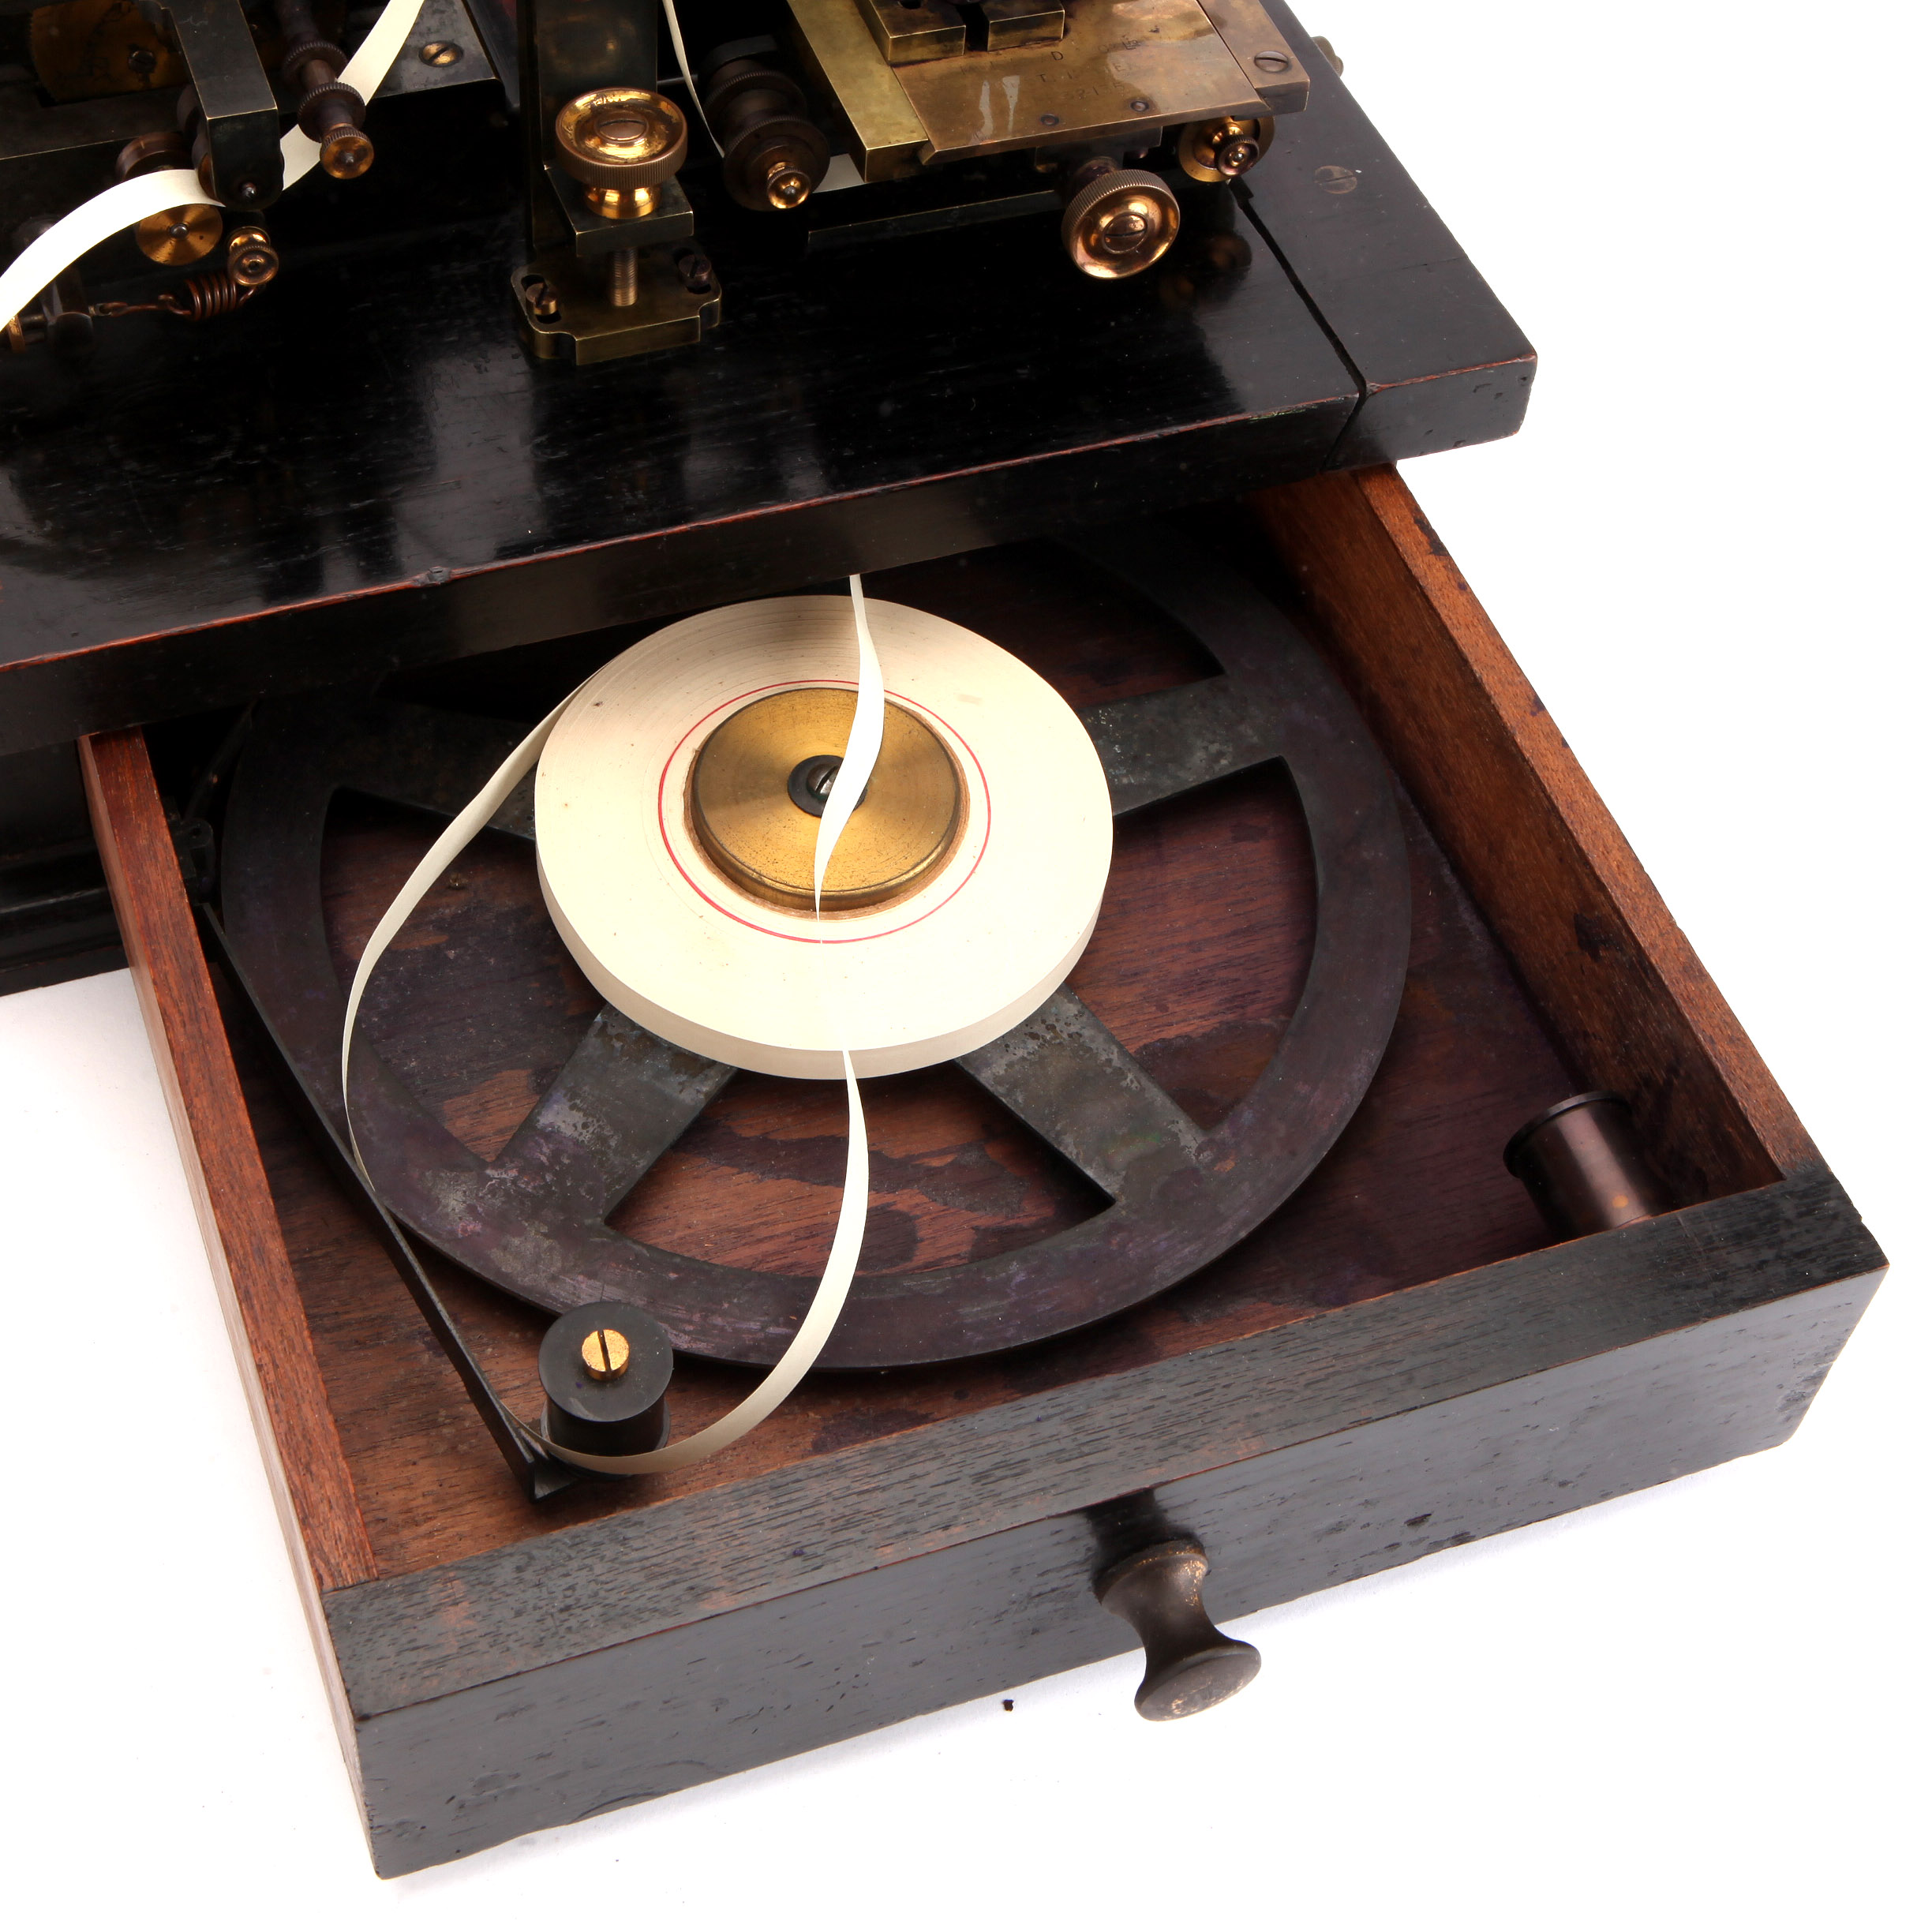 A Telegraph Siphon Recorder By Muirhead & Co. Ltd, Westminster, - Image 5 of 7